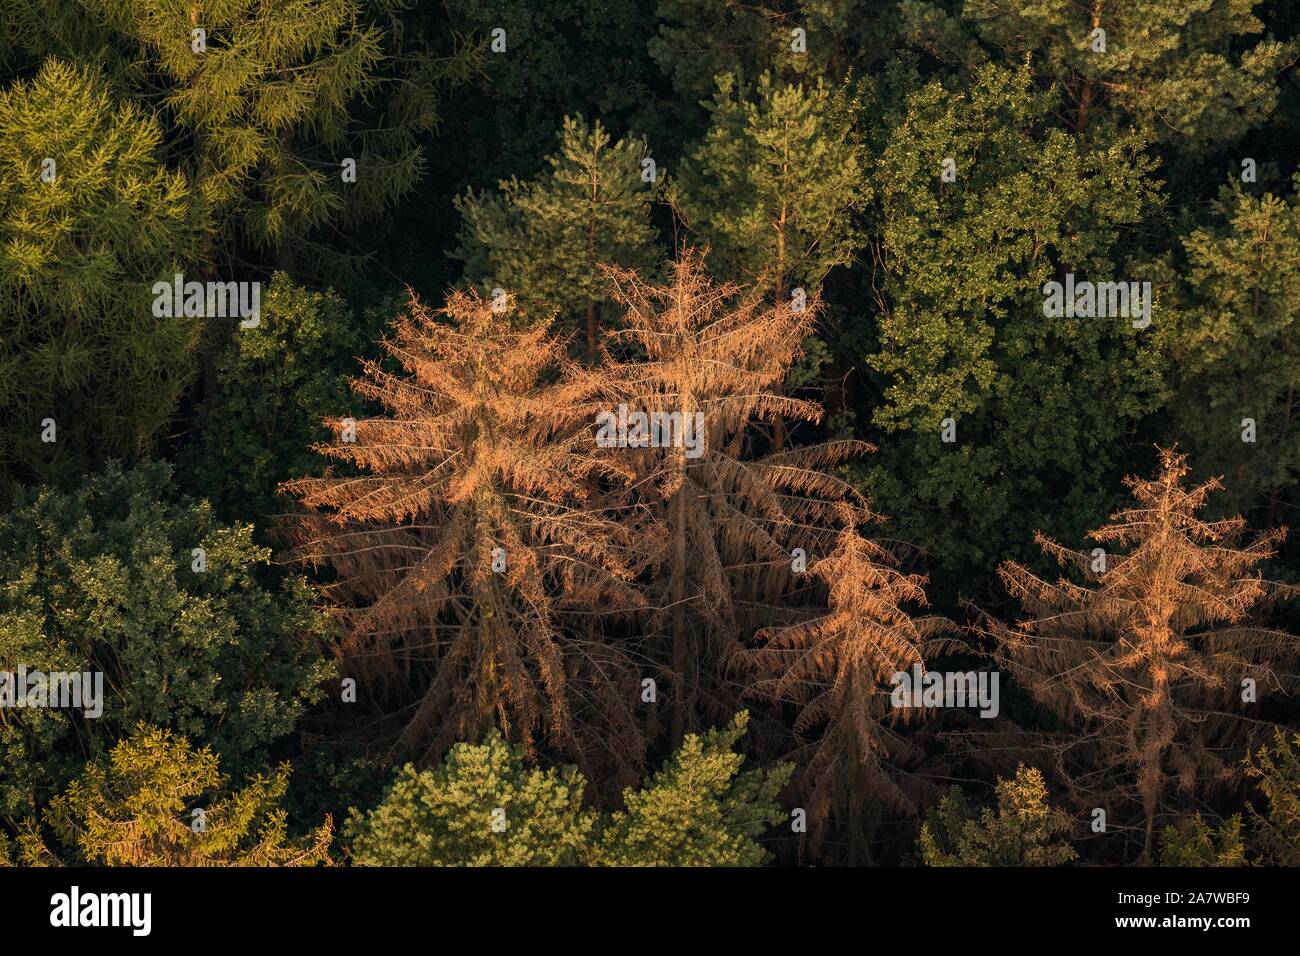 Bark beetle calamity in the Czech Republic on an aerial photograph Stock Photo